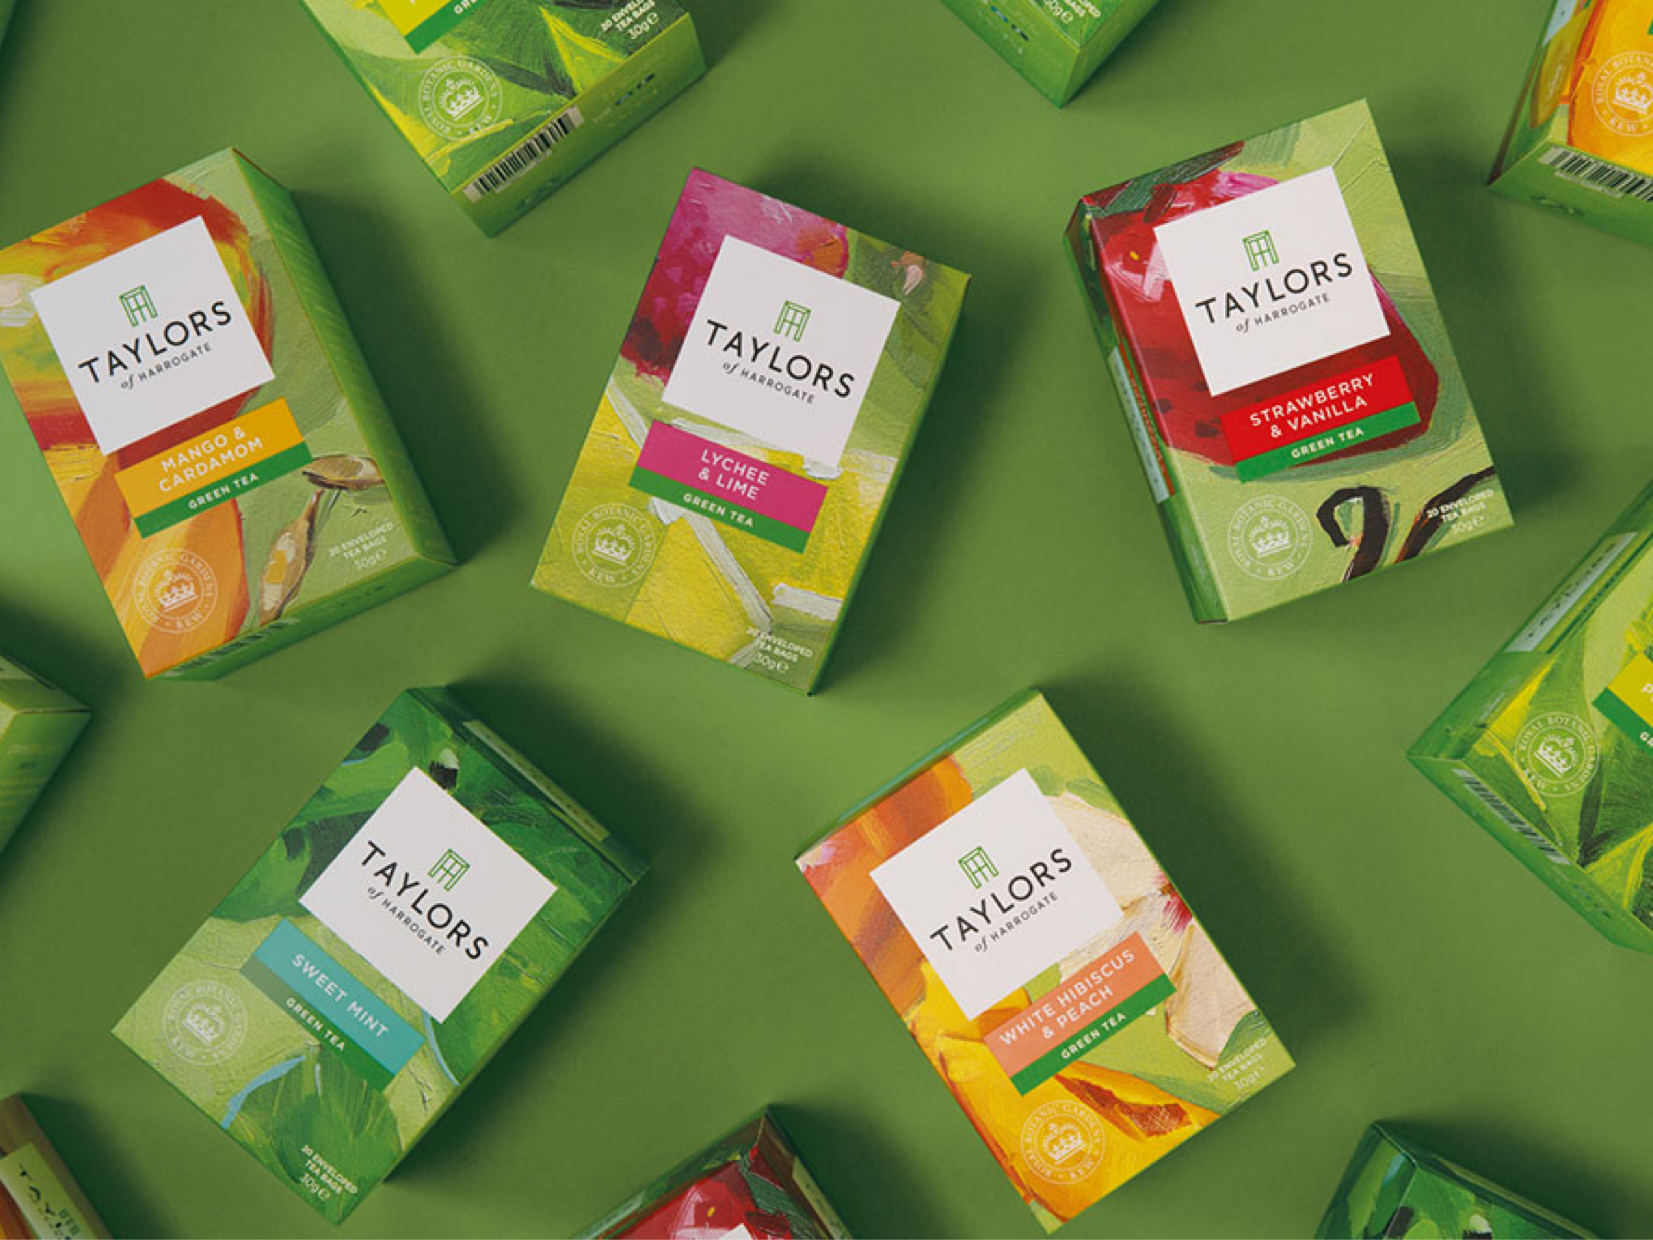 Packages for different flavours of tea from Taylors of Harrogate